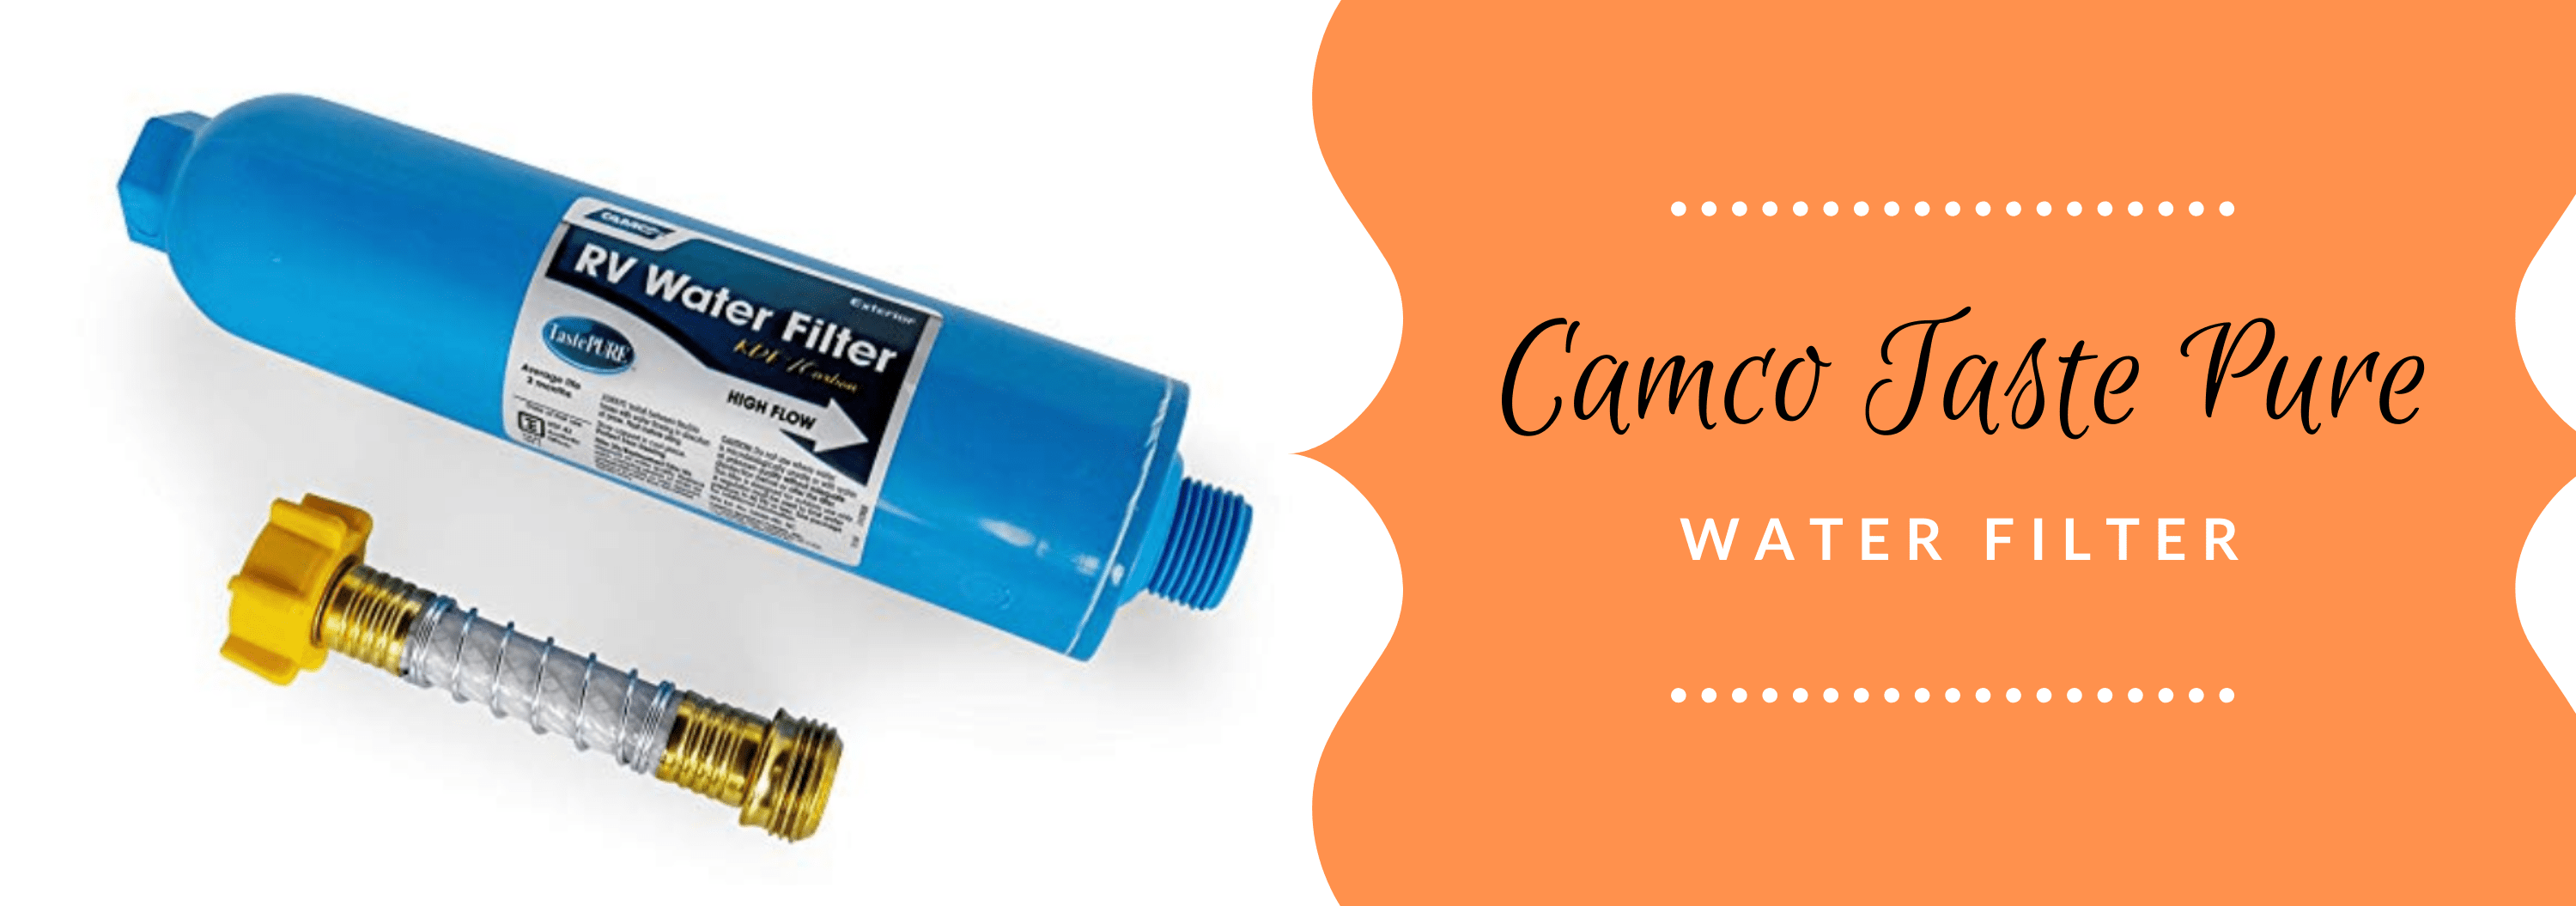 Camco Taste Pure Water Filter.png